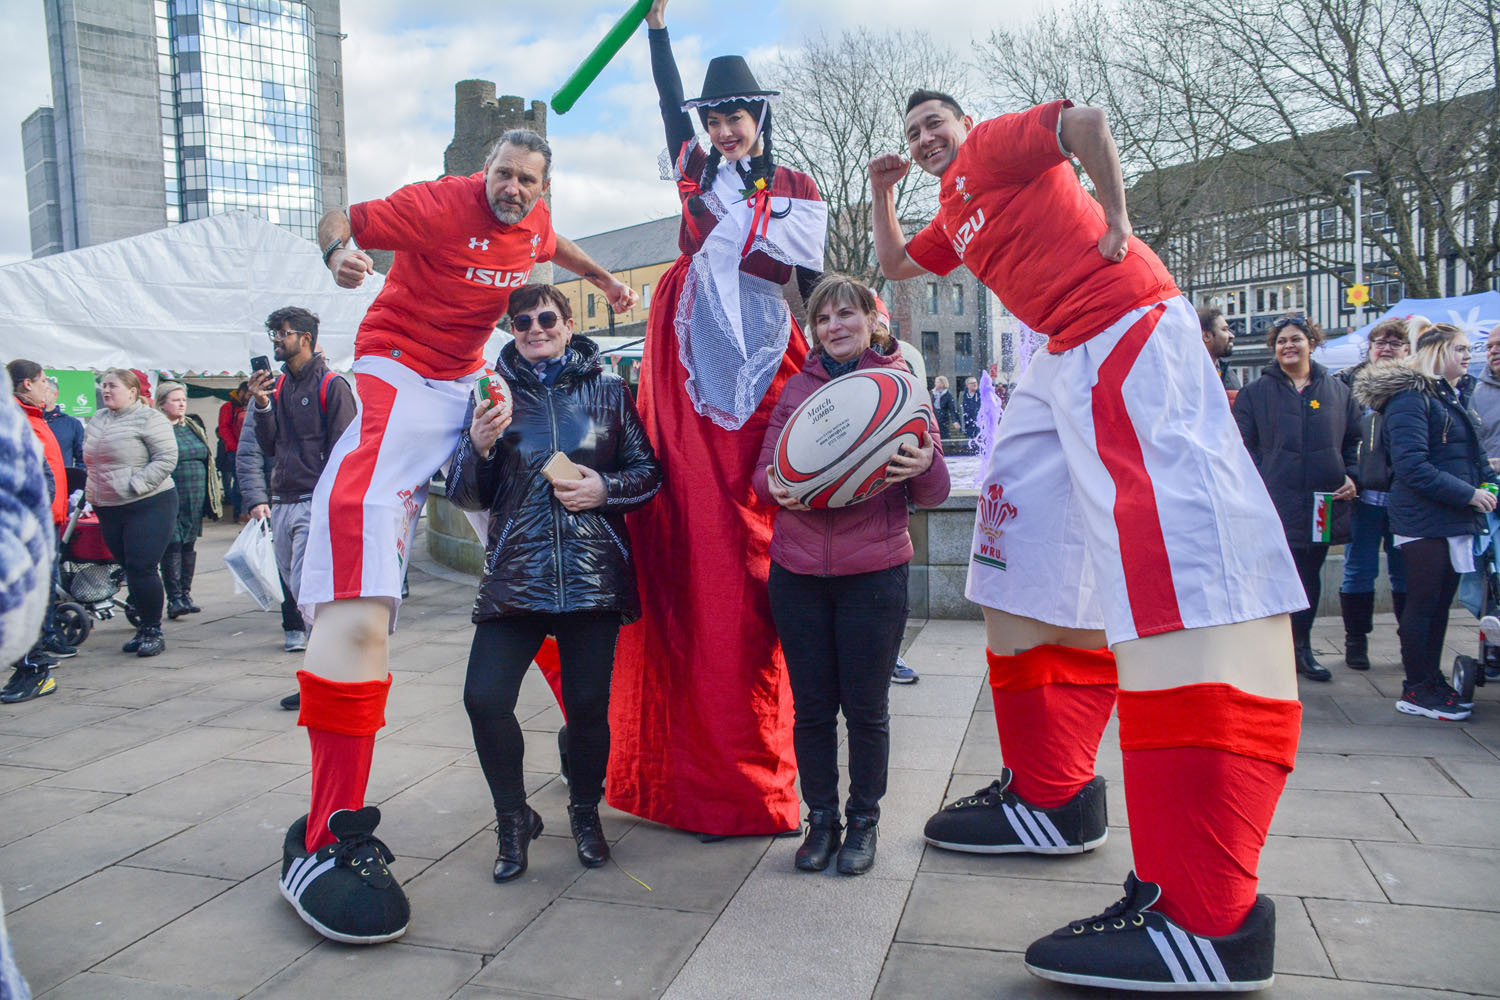 Scenes from Swansea city centre’s 2023 Croeso festival. (Image: Swansea Council)